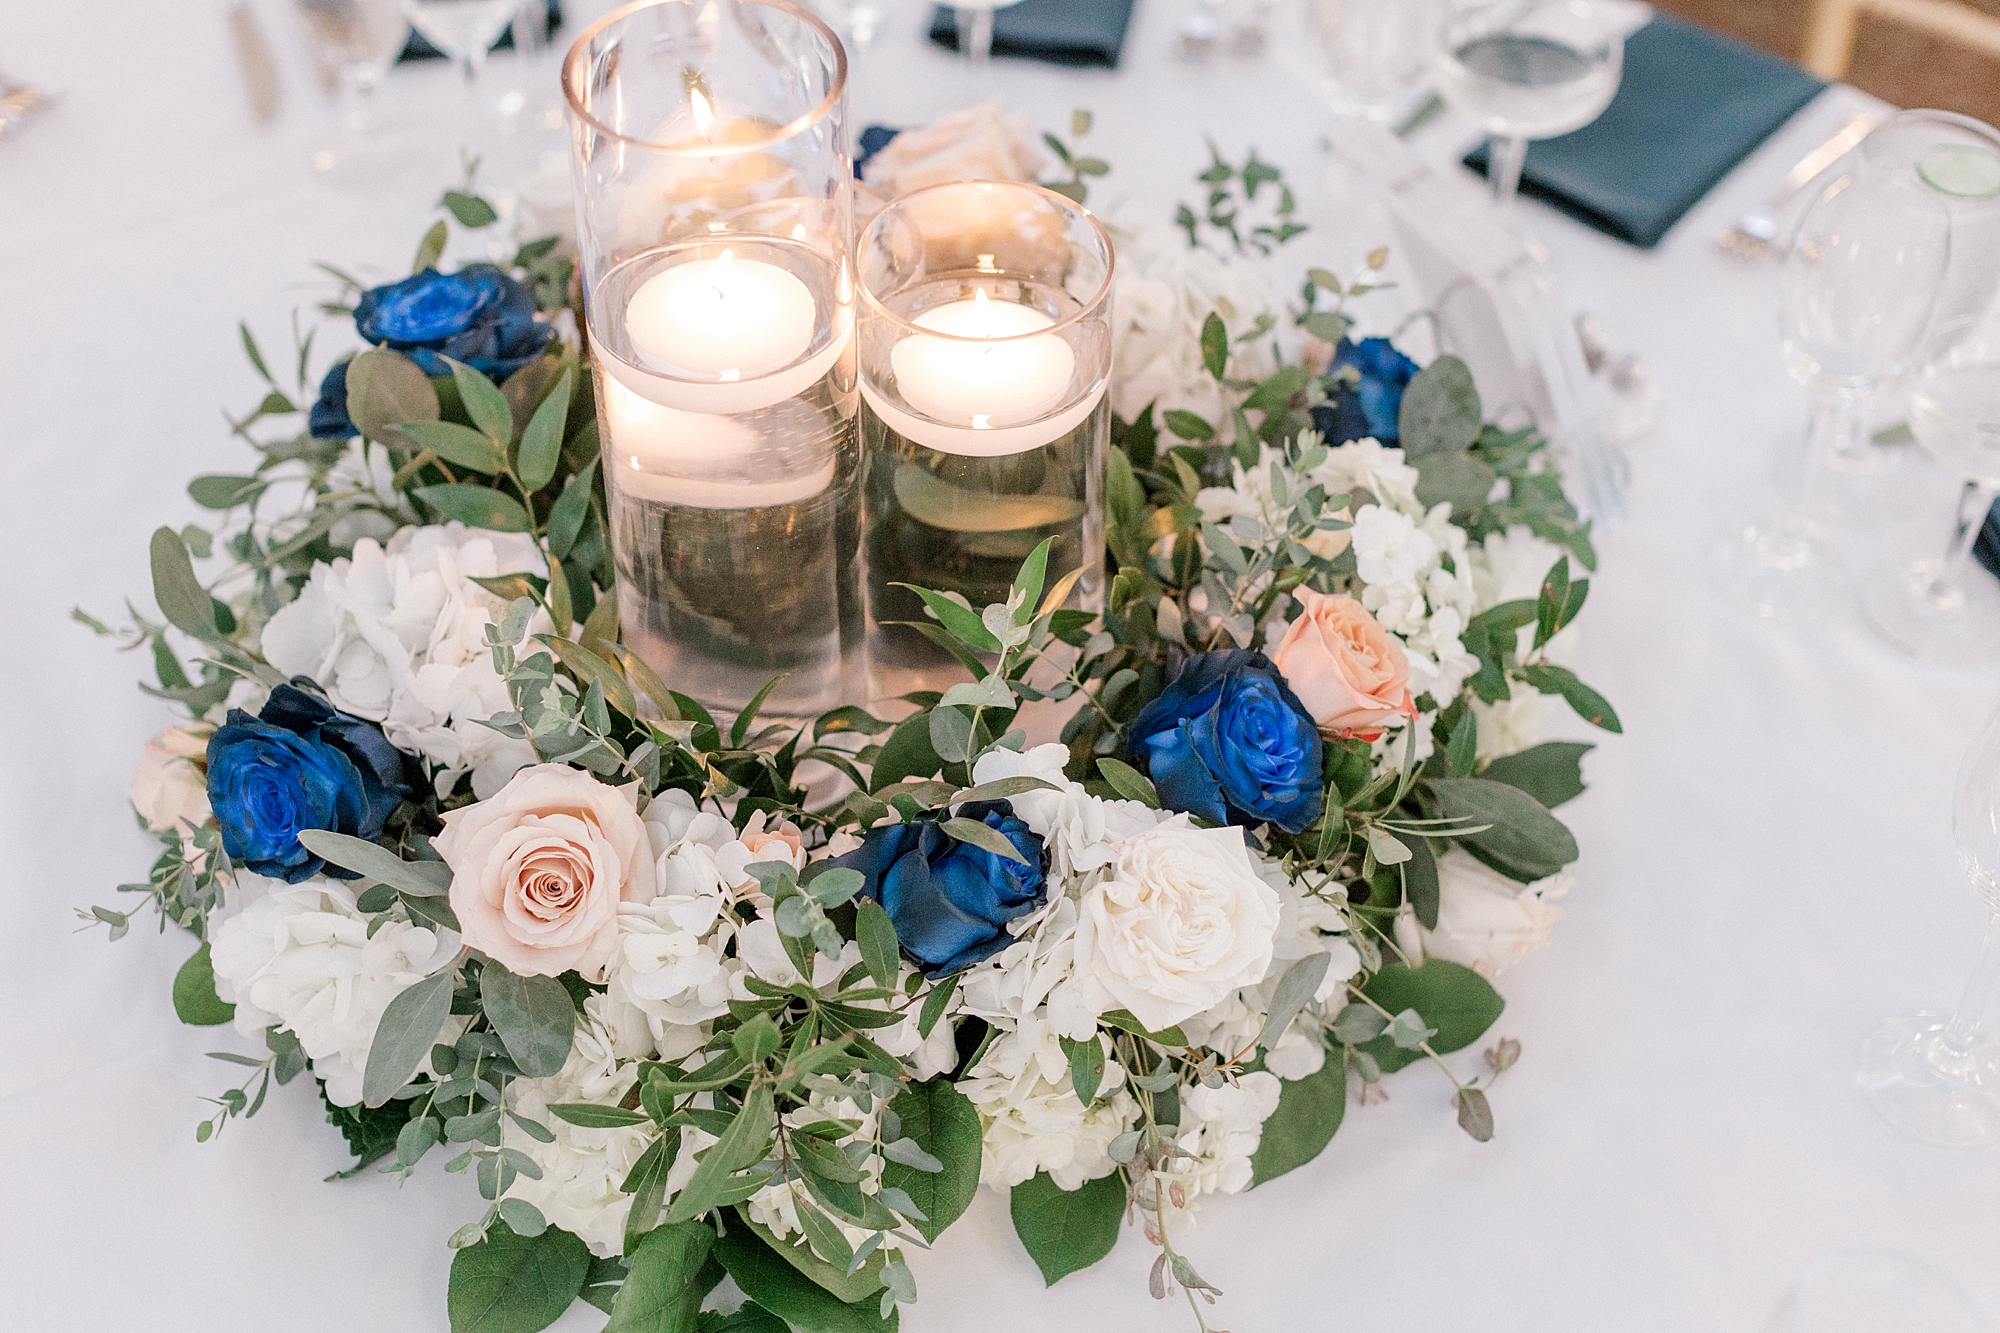 wedding reception centerpieces with white and blue flowers and floating candles